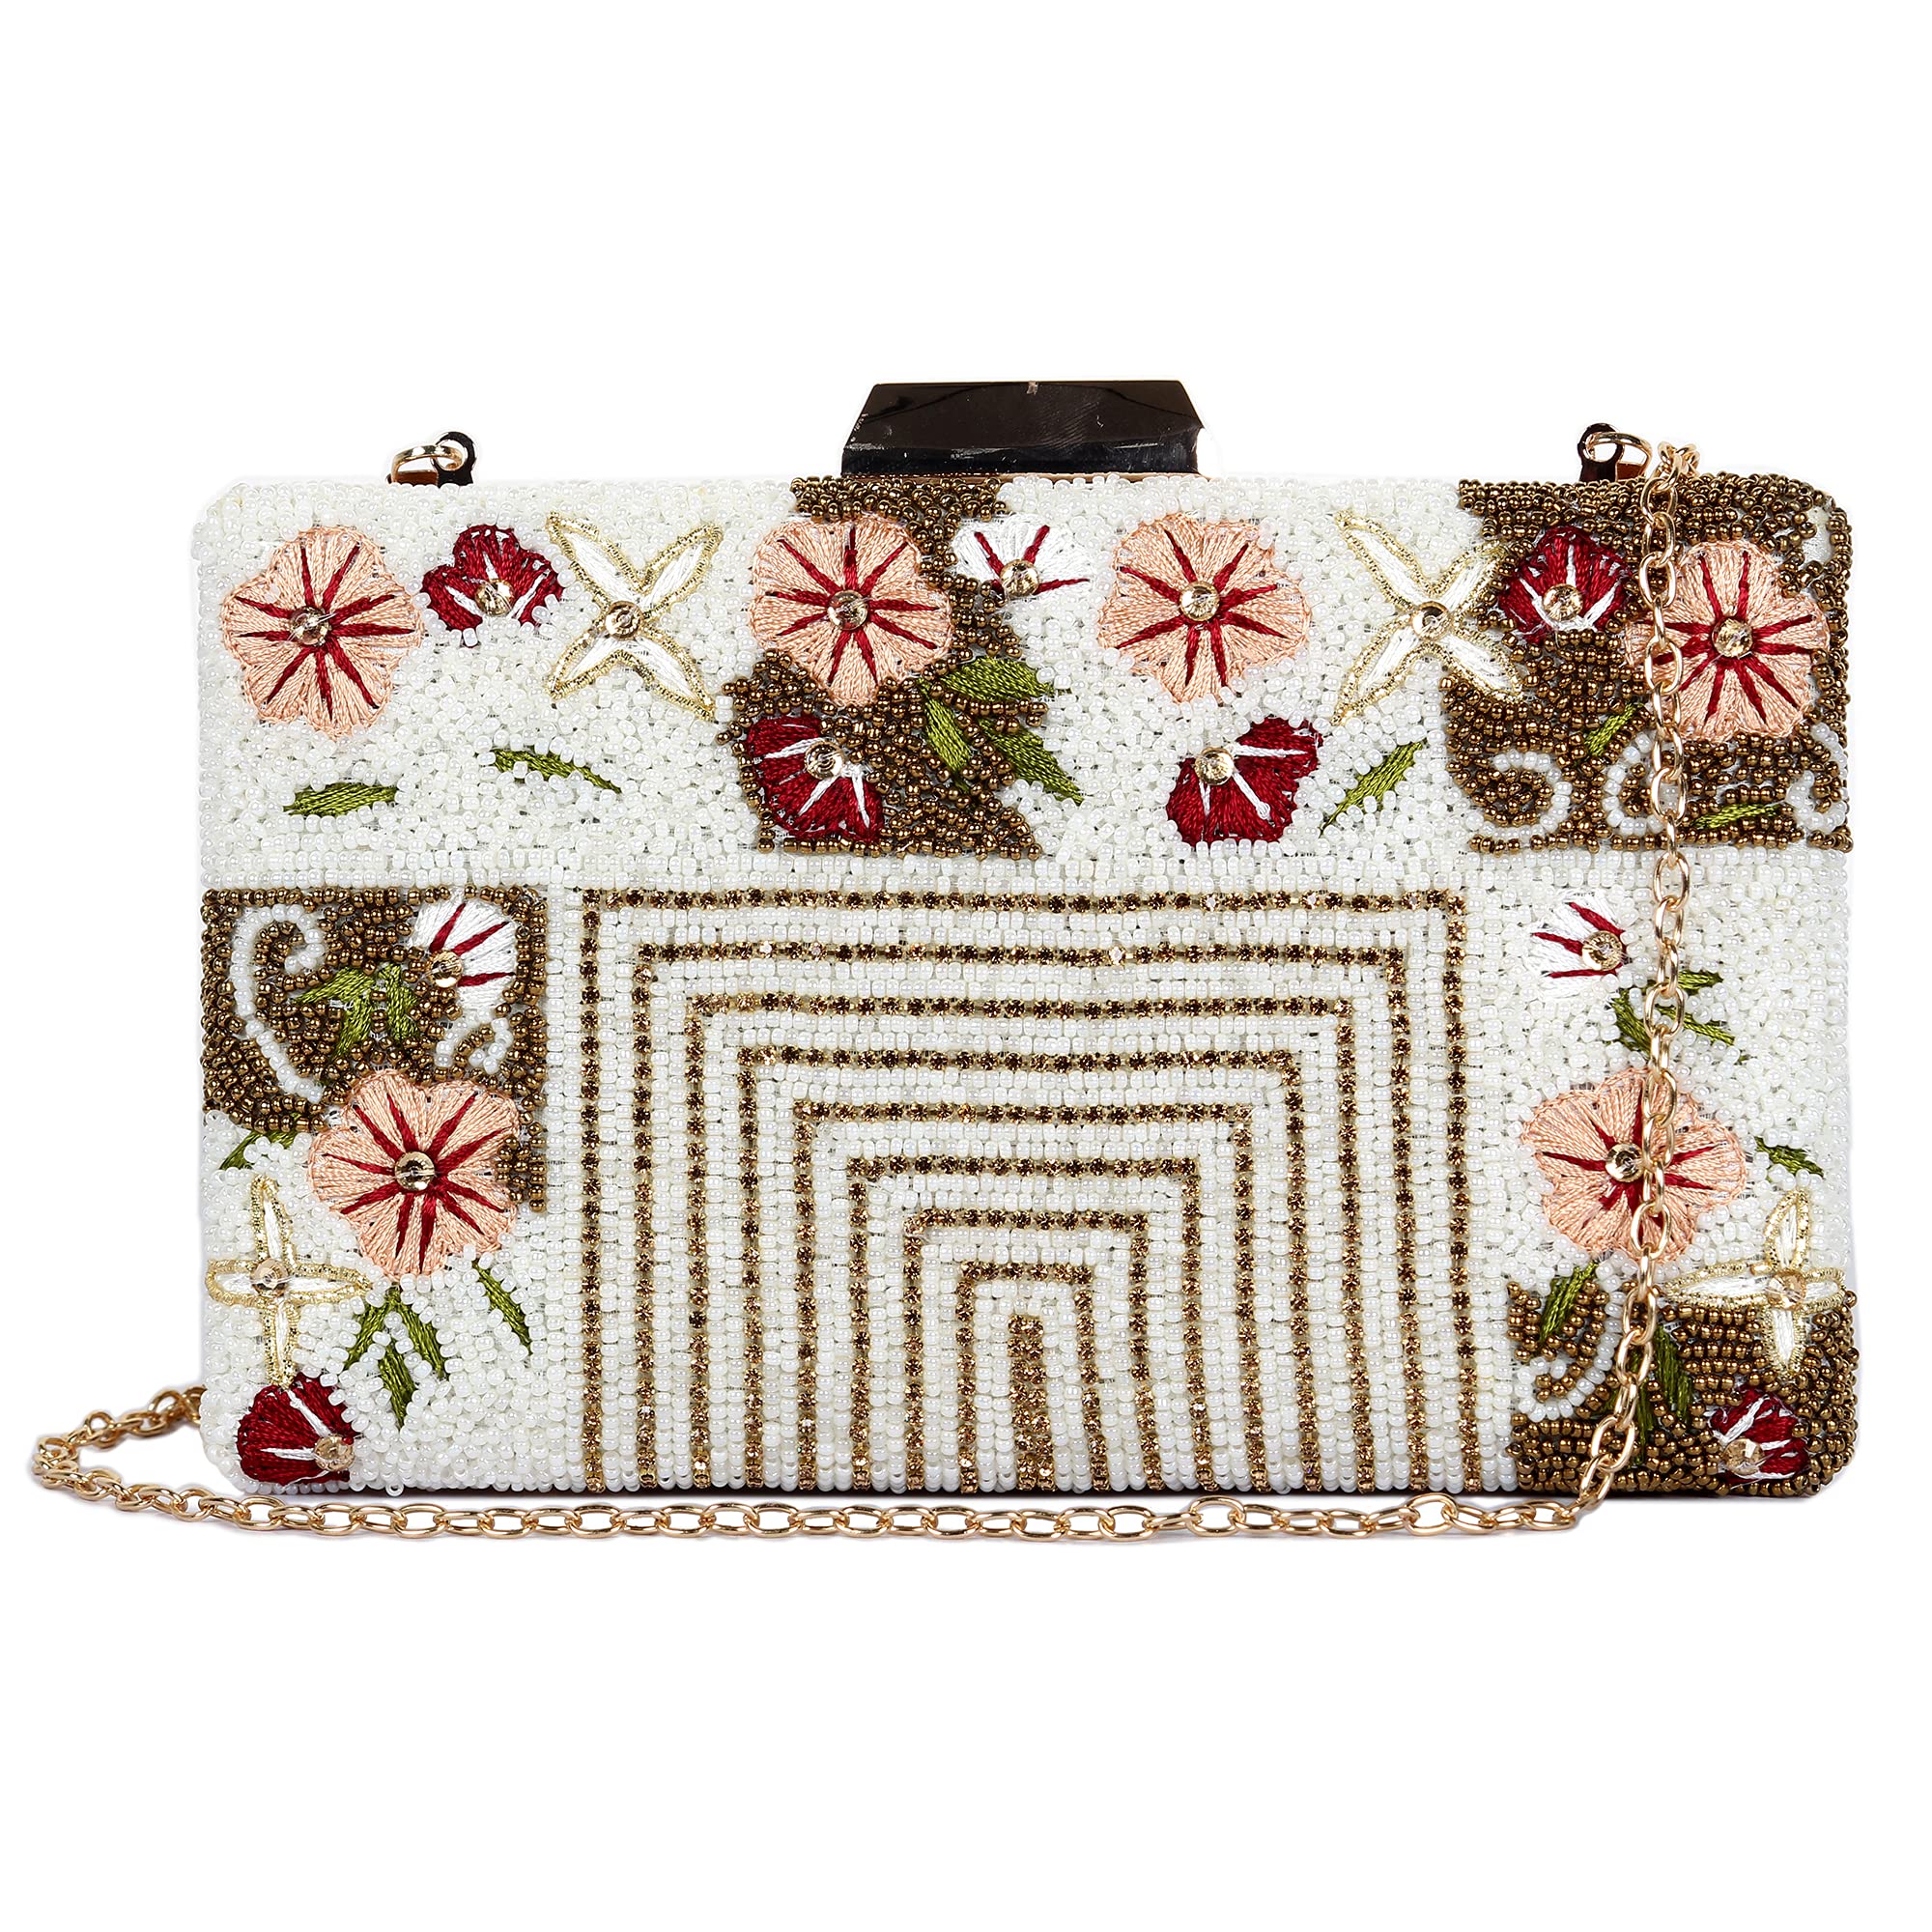 The Clownfish Senorita Collection Womens Party Clutch Ladies Wallet Evening Bag with Fashionable Beads Work and Floral Embroidered Design (White)